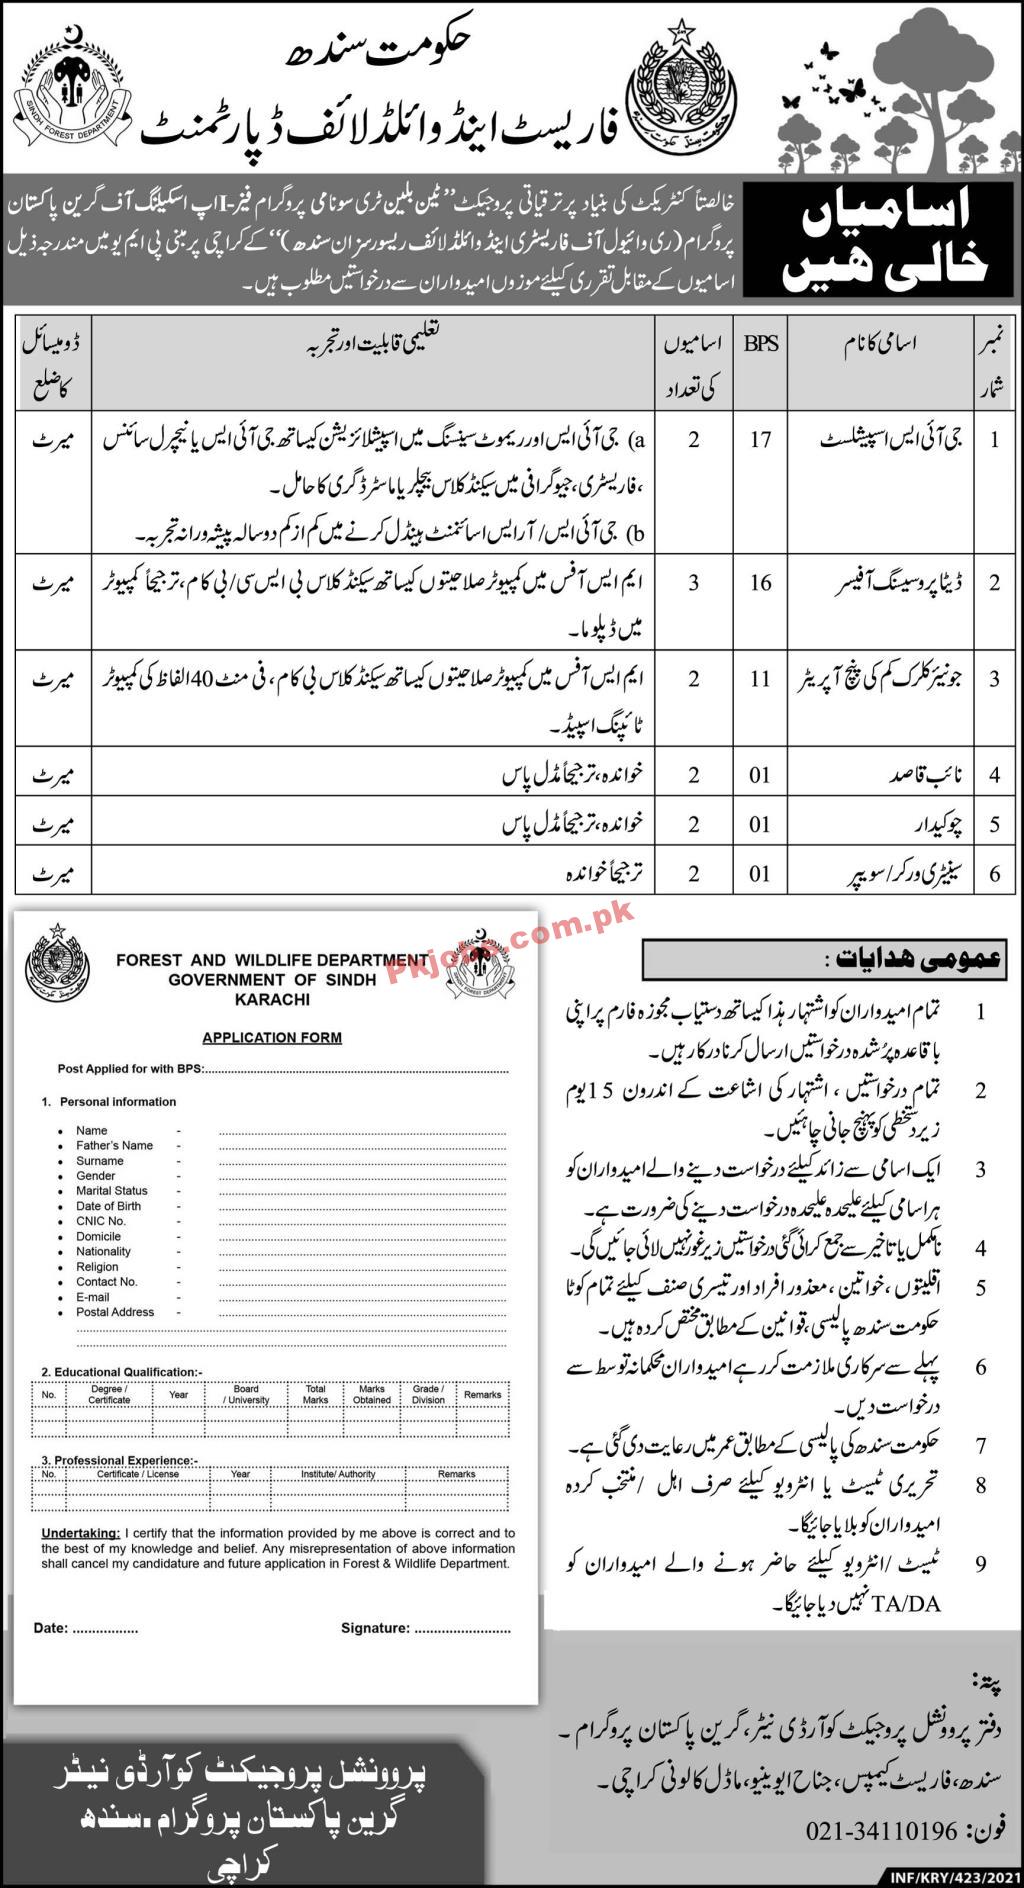 Jobs in Forest and Wildlife Department Government of Sindh